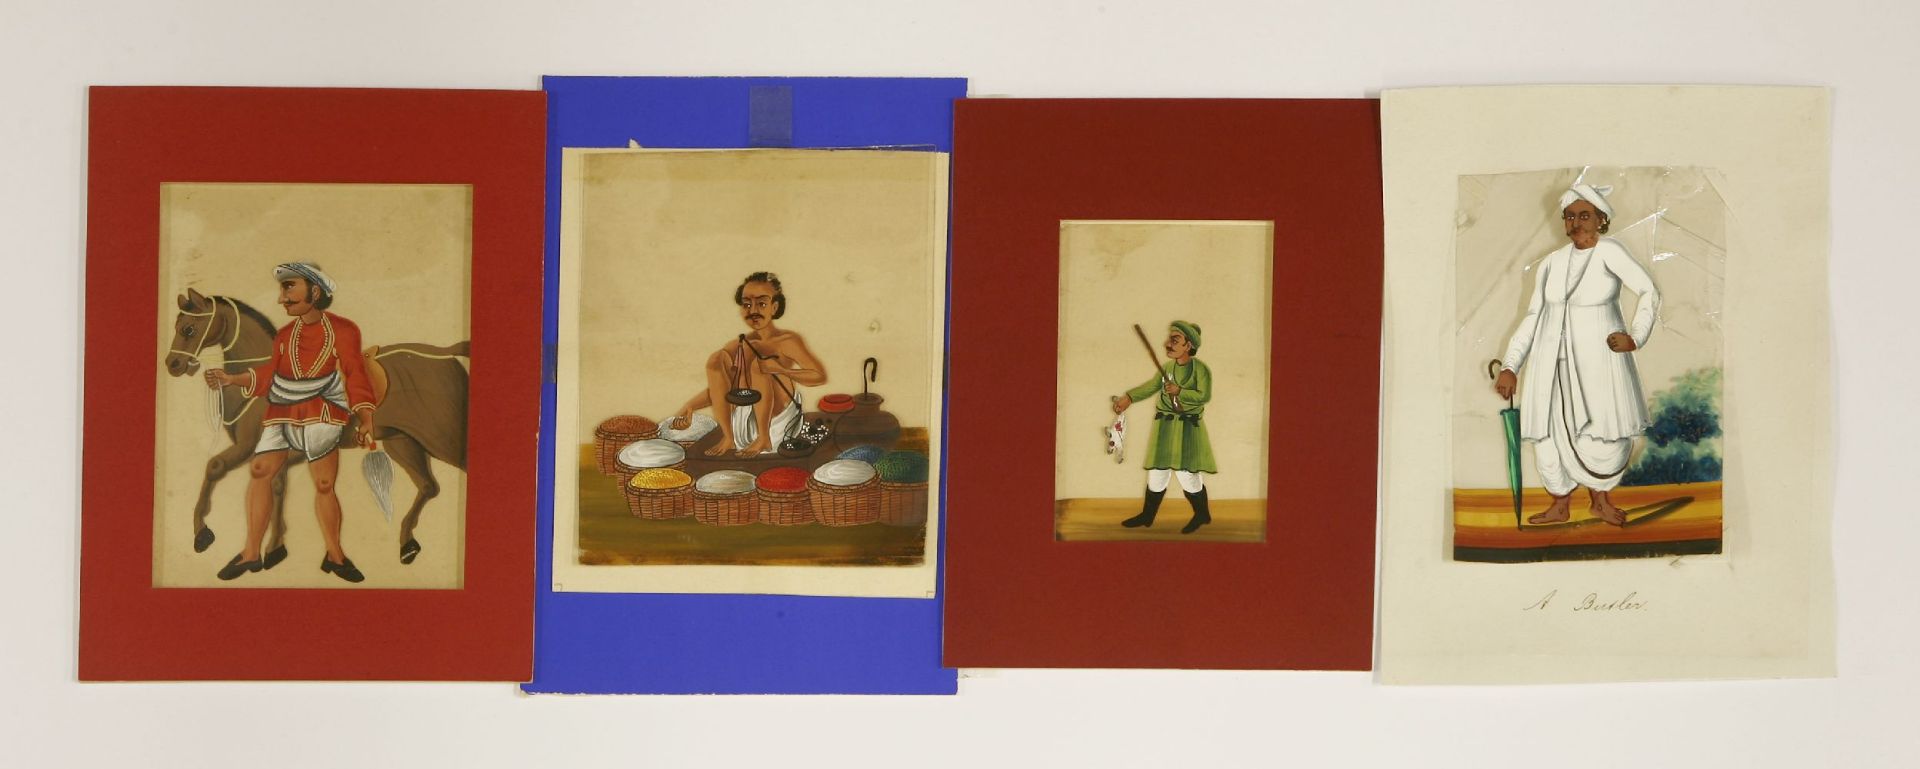 Fourteen Indian paintings on mica,mid-19th century, representing various occupations,largest 16 x - Image 2 of 2